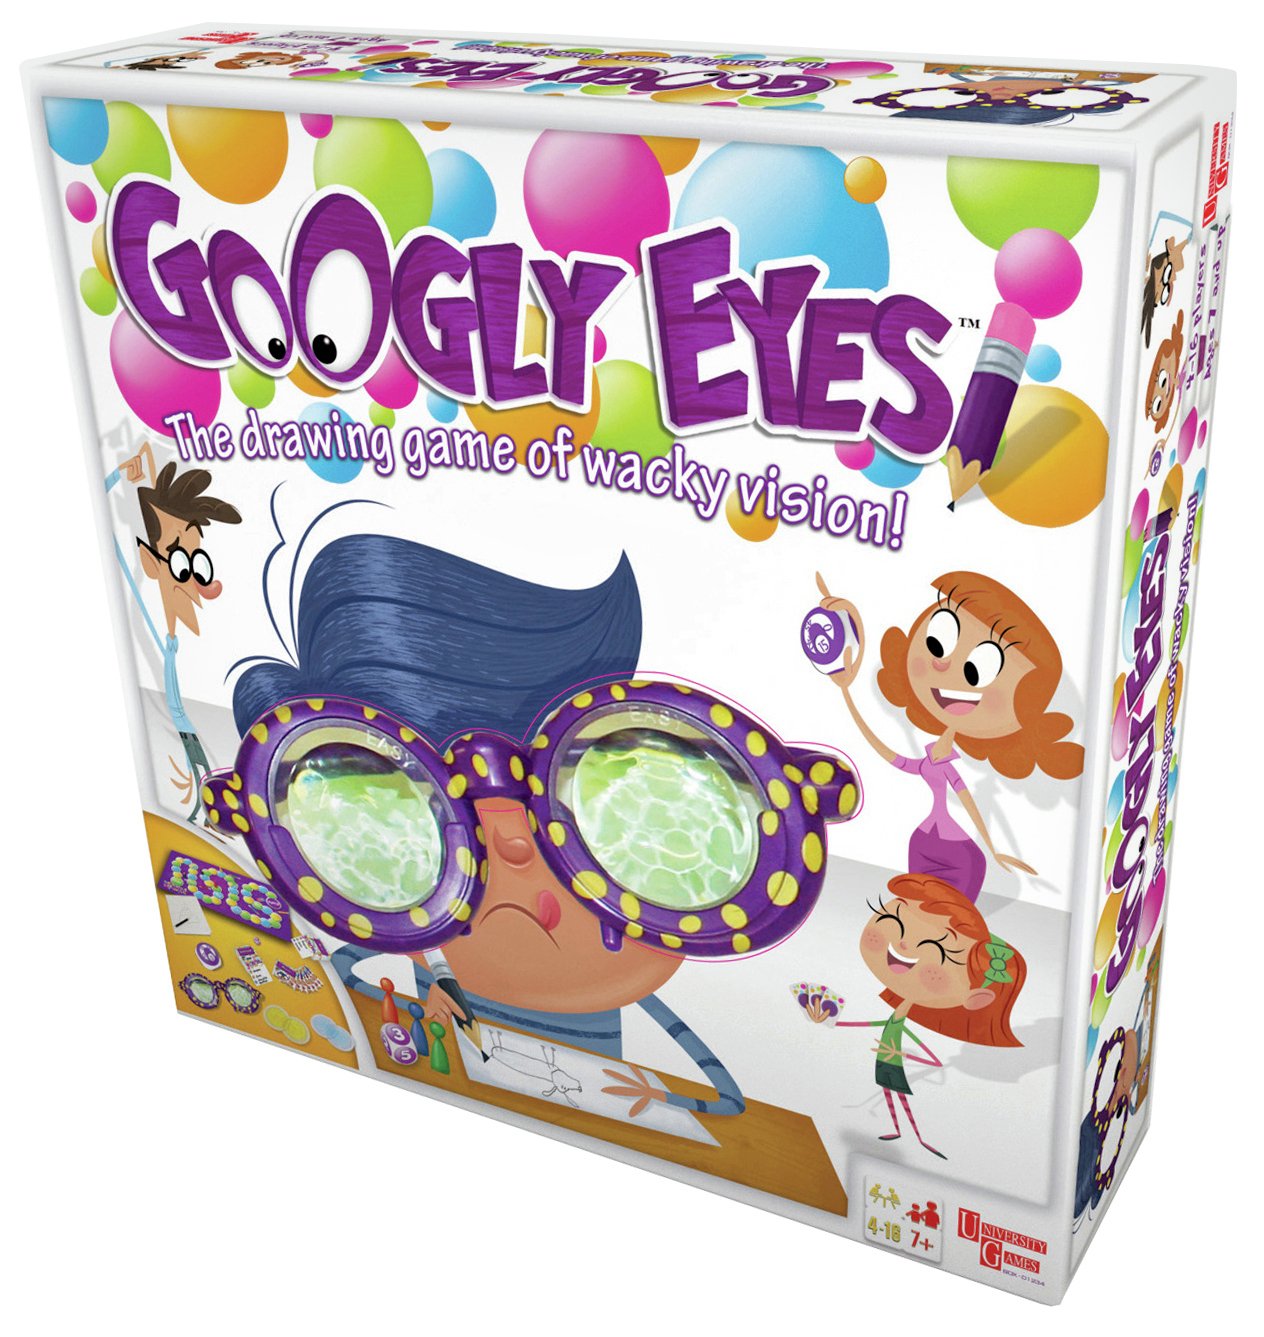 Googly Eyes Review